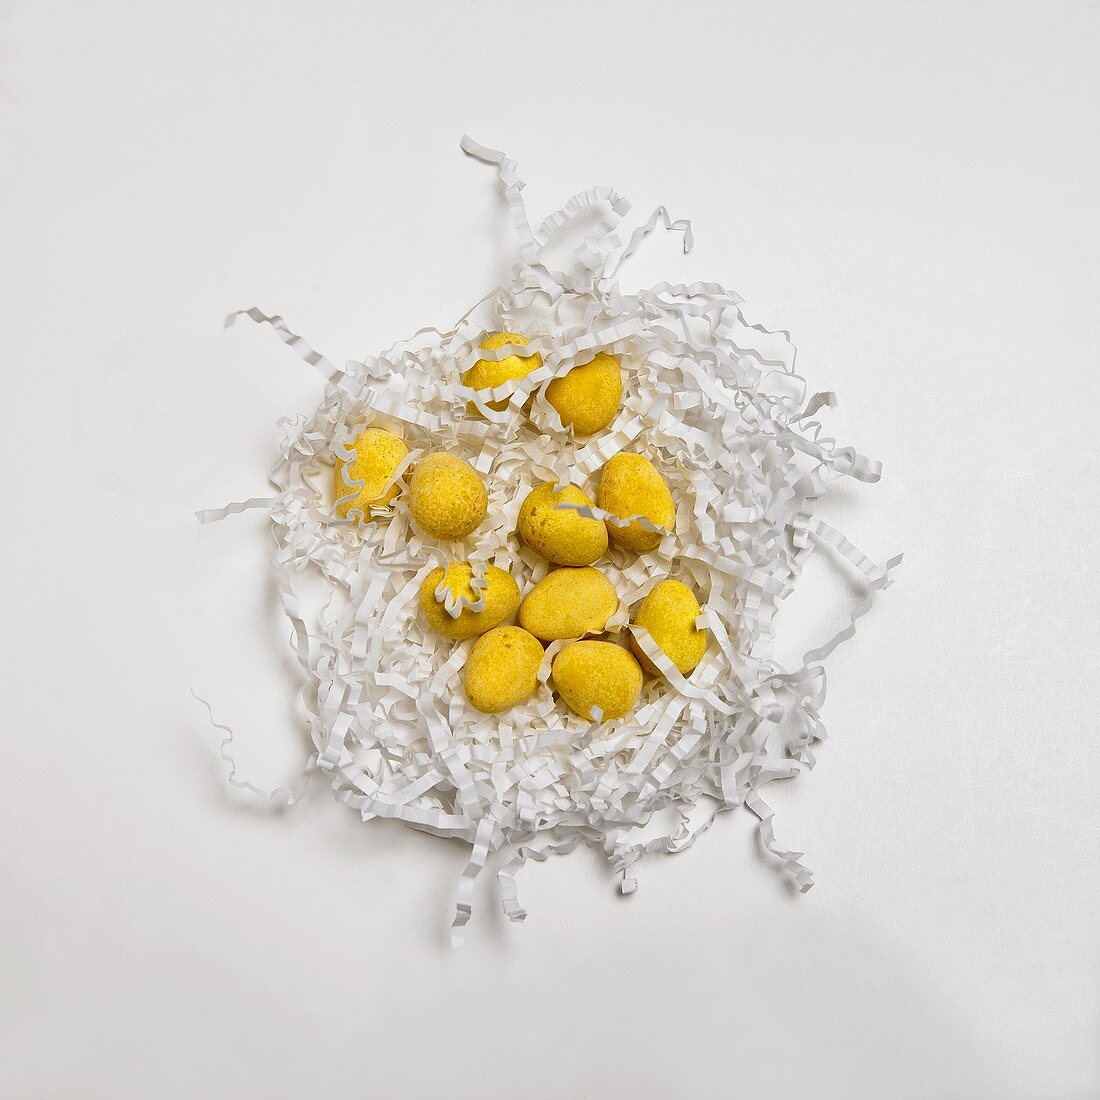 Yellow Egg-Shaped Candies on a Nest of Shredded White Paper